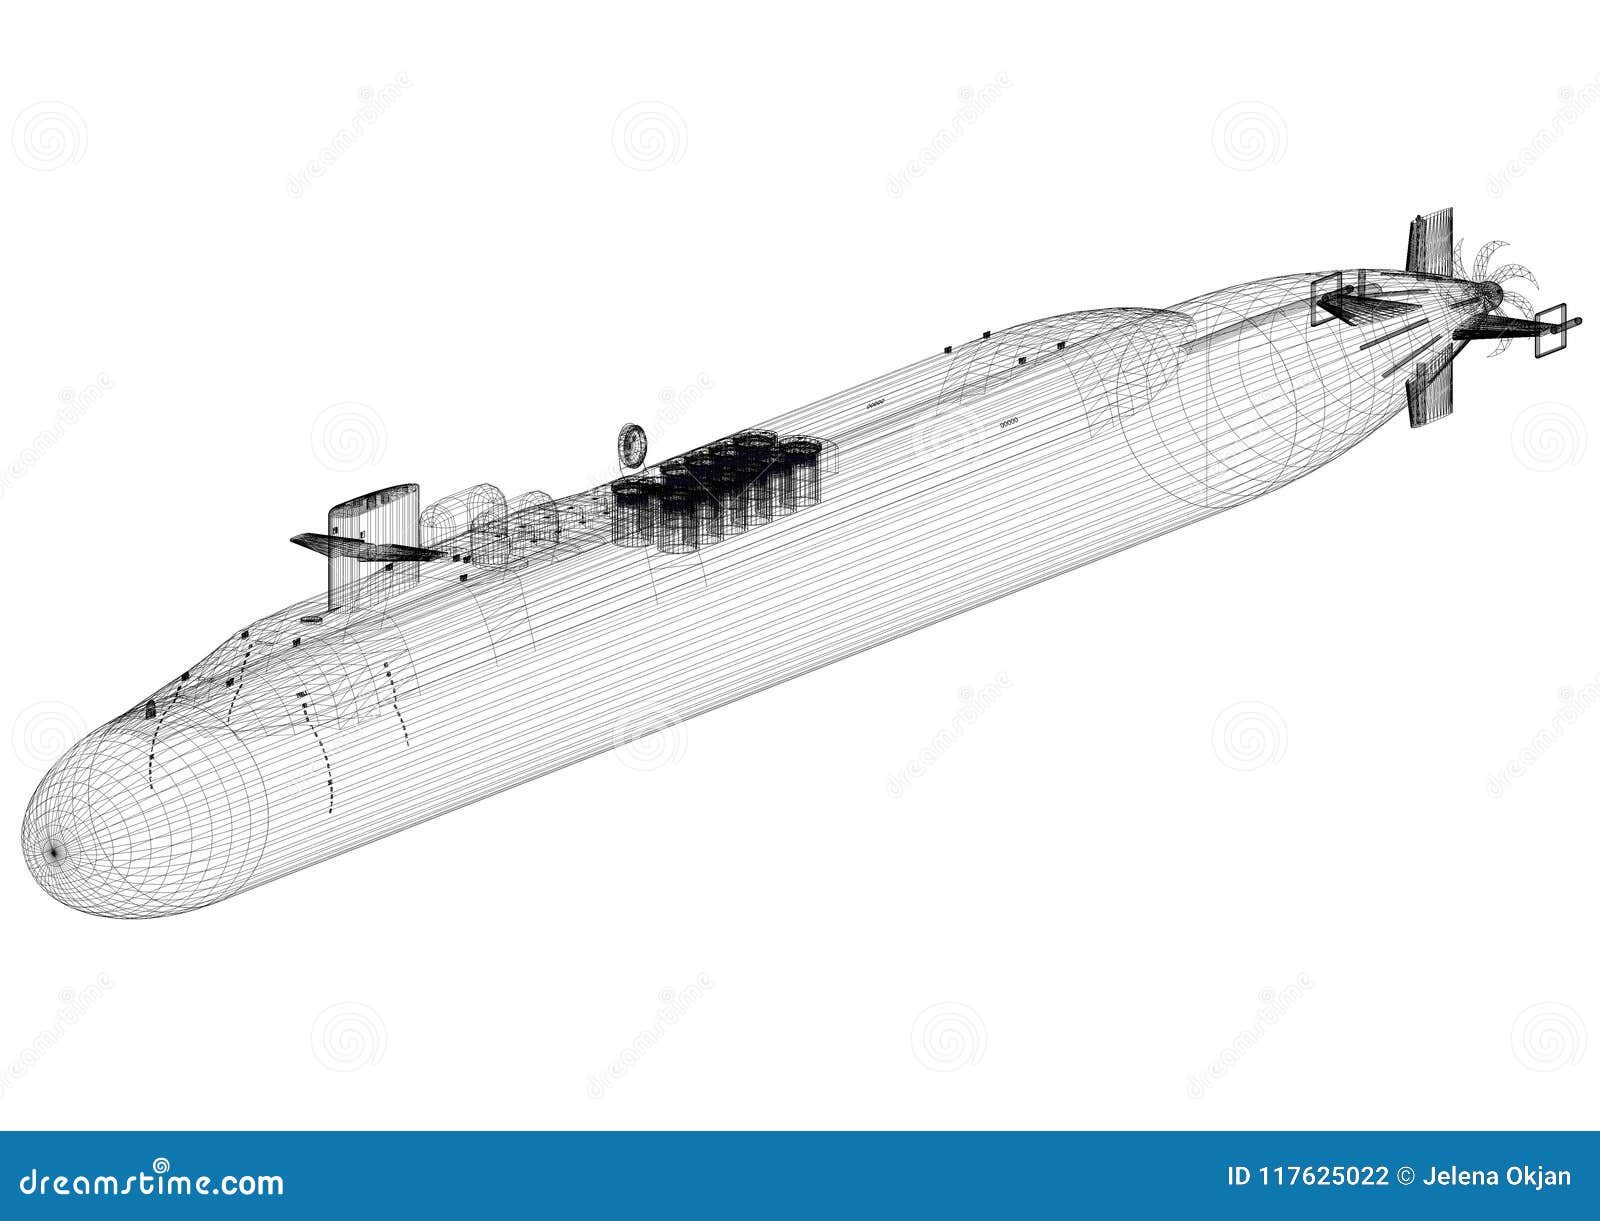 How to draw a Submarine Step by Step